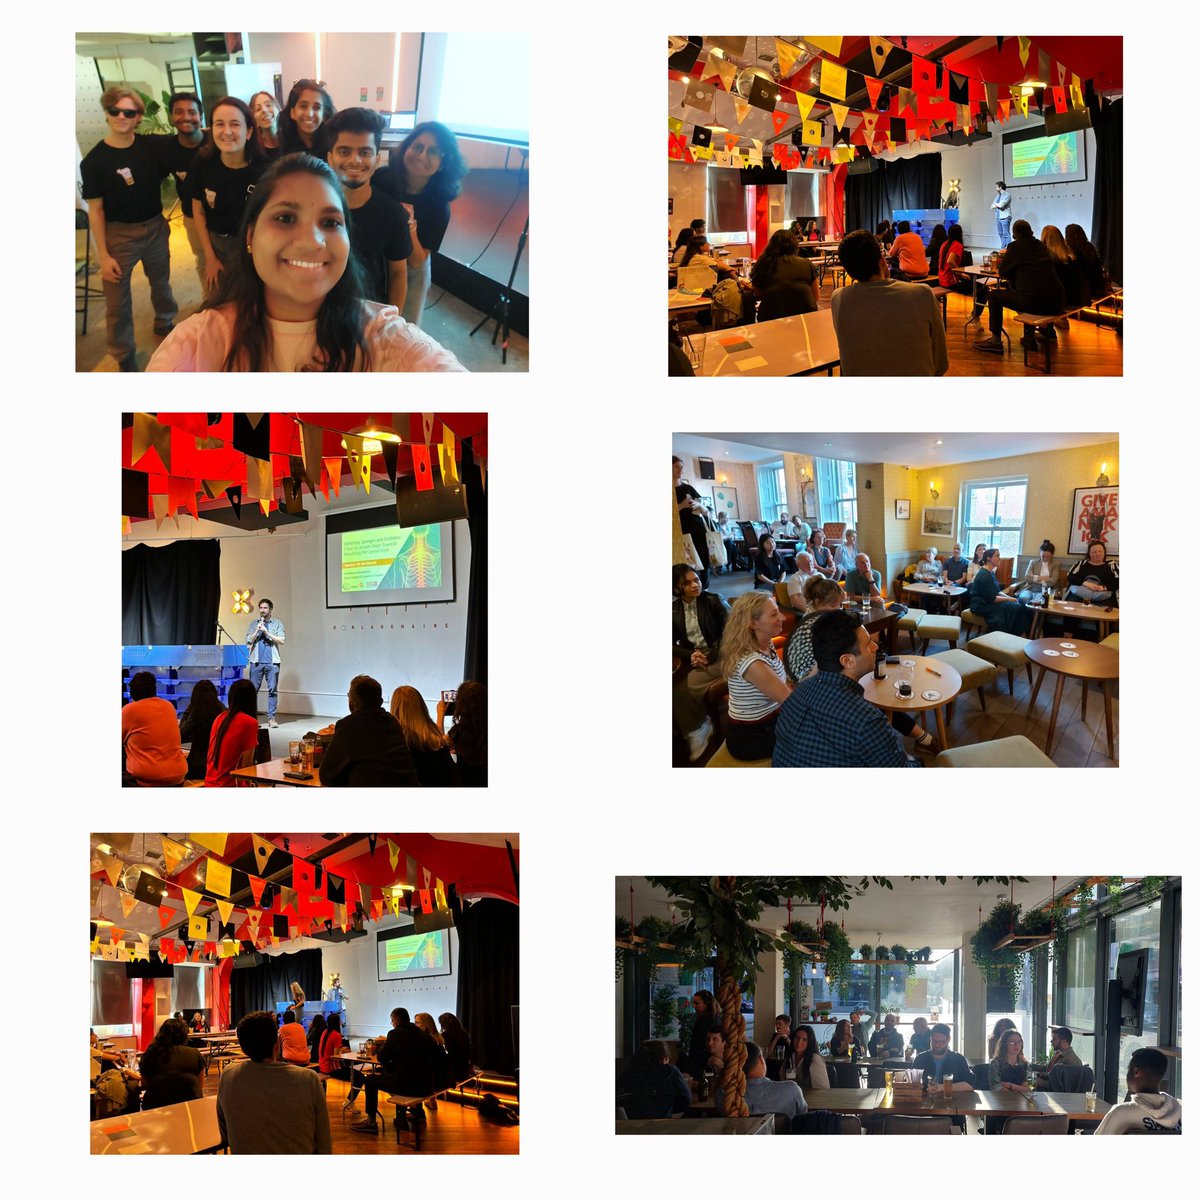 Ending this year's biggest science festival #pint24 with amazing talks, unwavering support from our lovely volunteers, and a big thanks to our sponsors!! @pintofscienceIE It was fun to hold these events across the cities in the local pubs where the audience meets #scientist